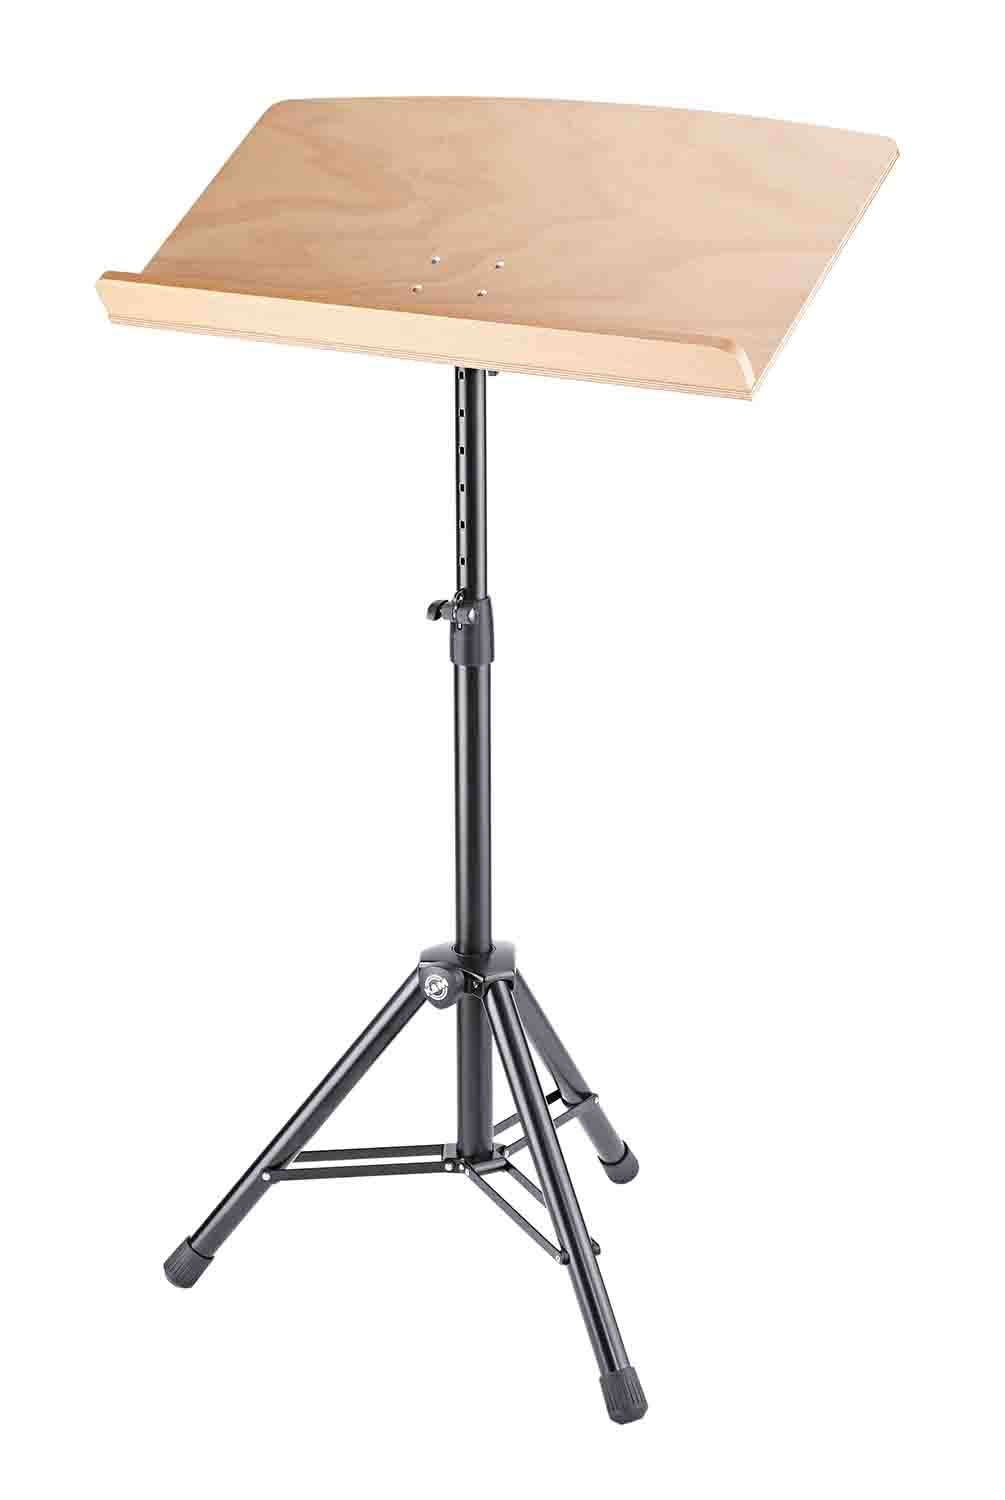 K&M 12332 Orchestra Conductor Stand Desk - Beech Nature - Hollywood DJ